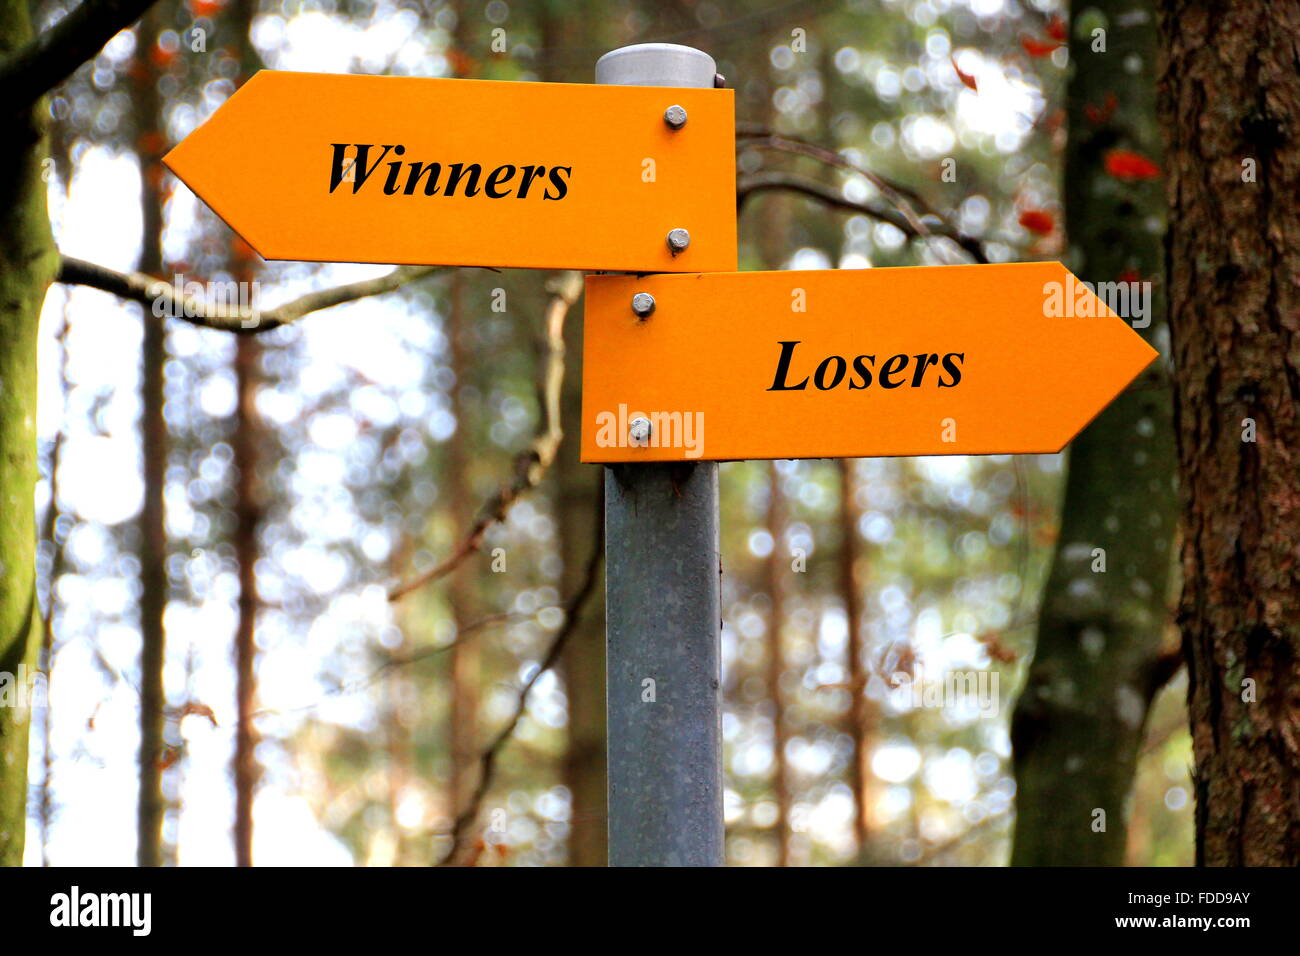 winners and losers written on a yellow direction sign Stock Photo